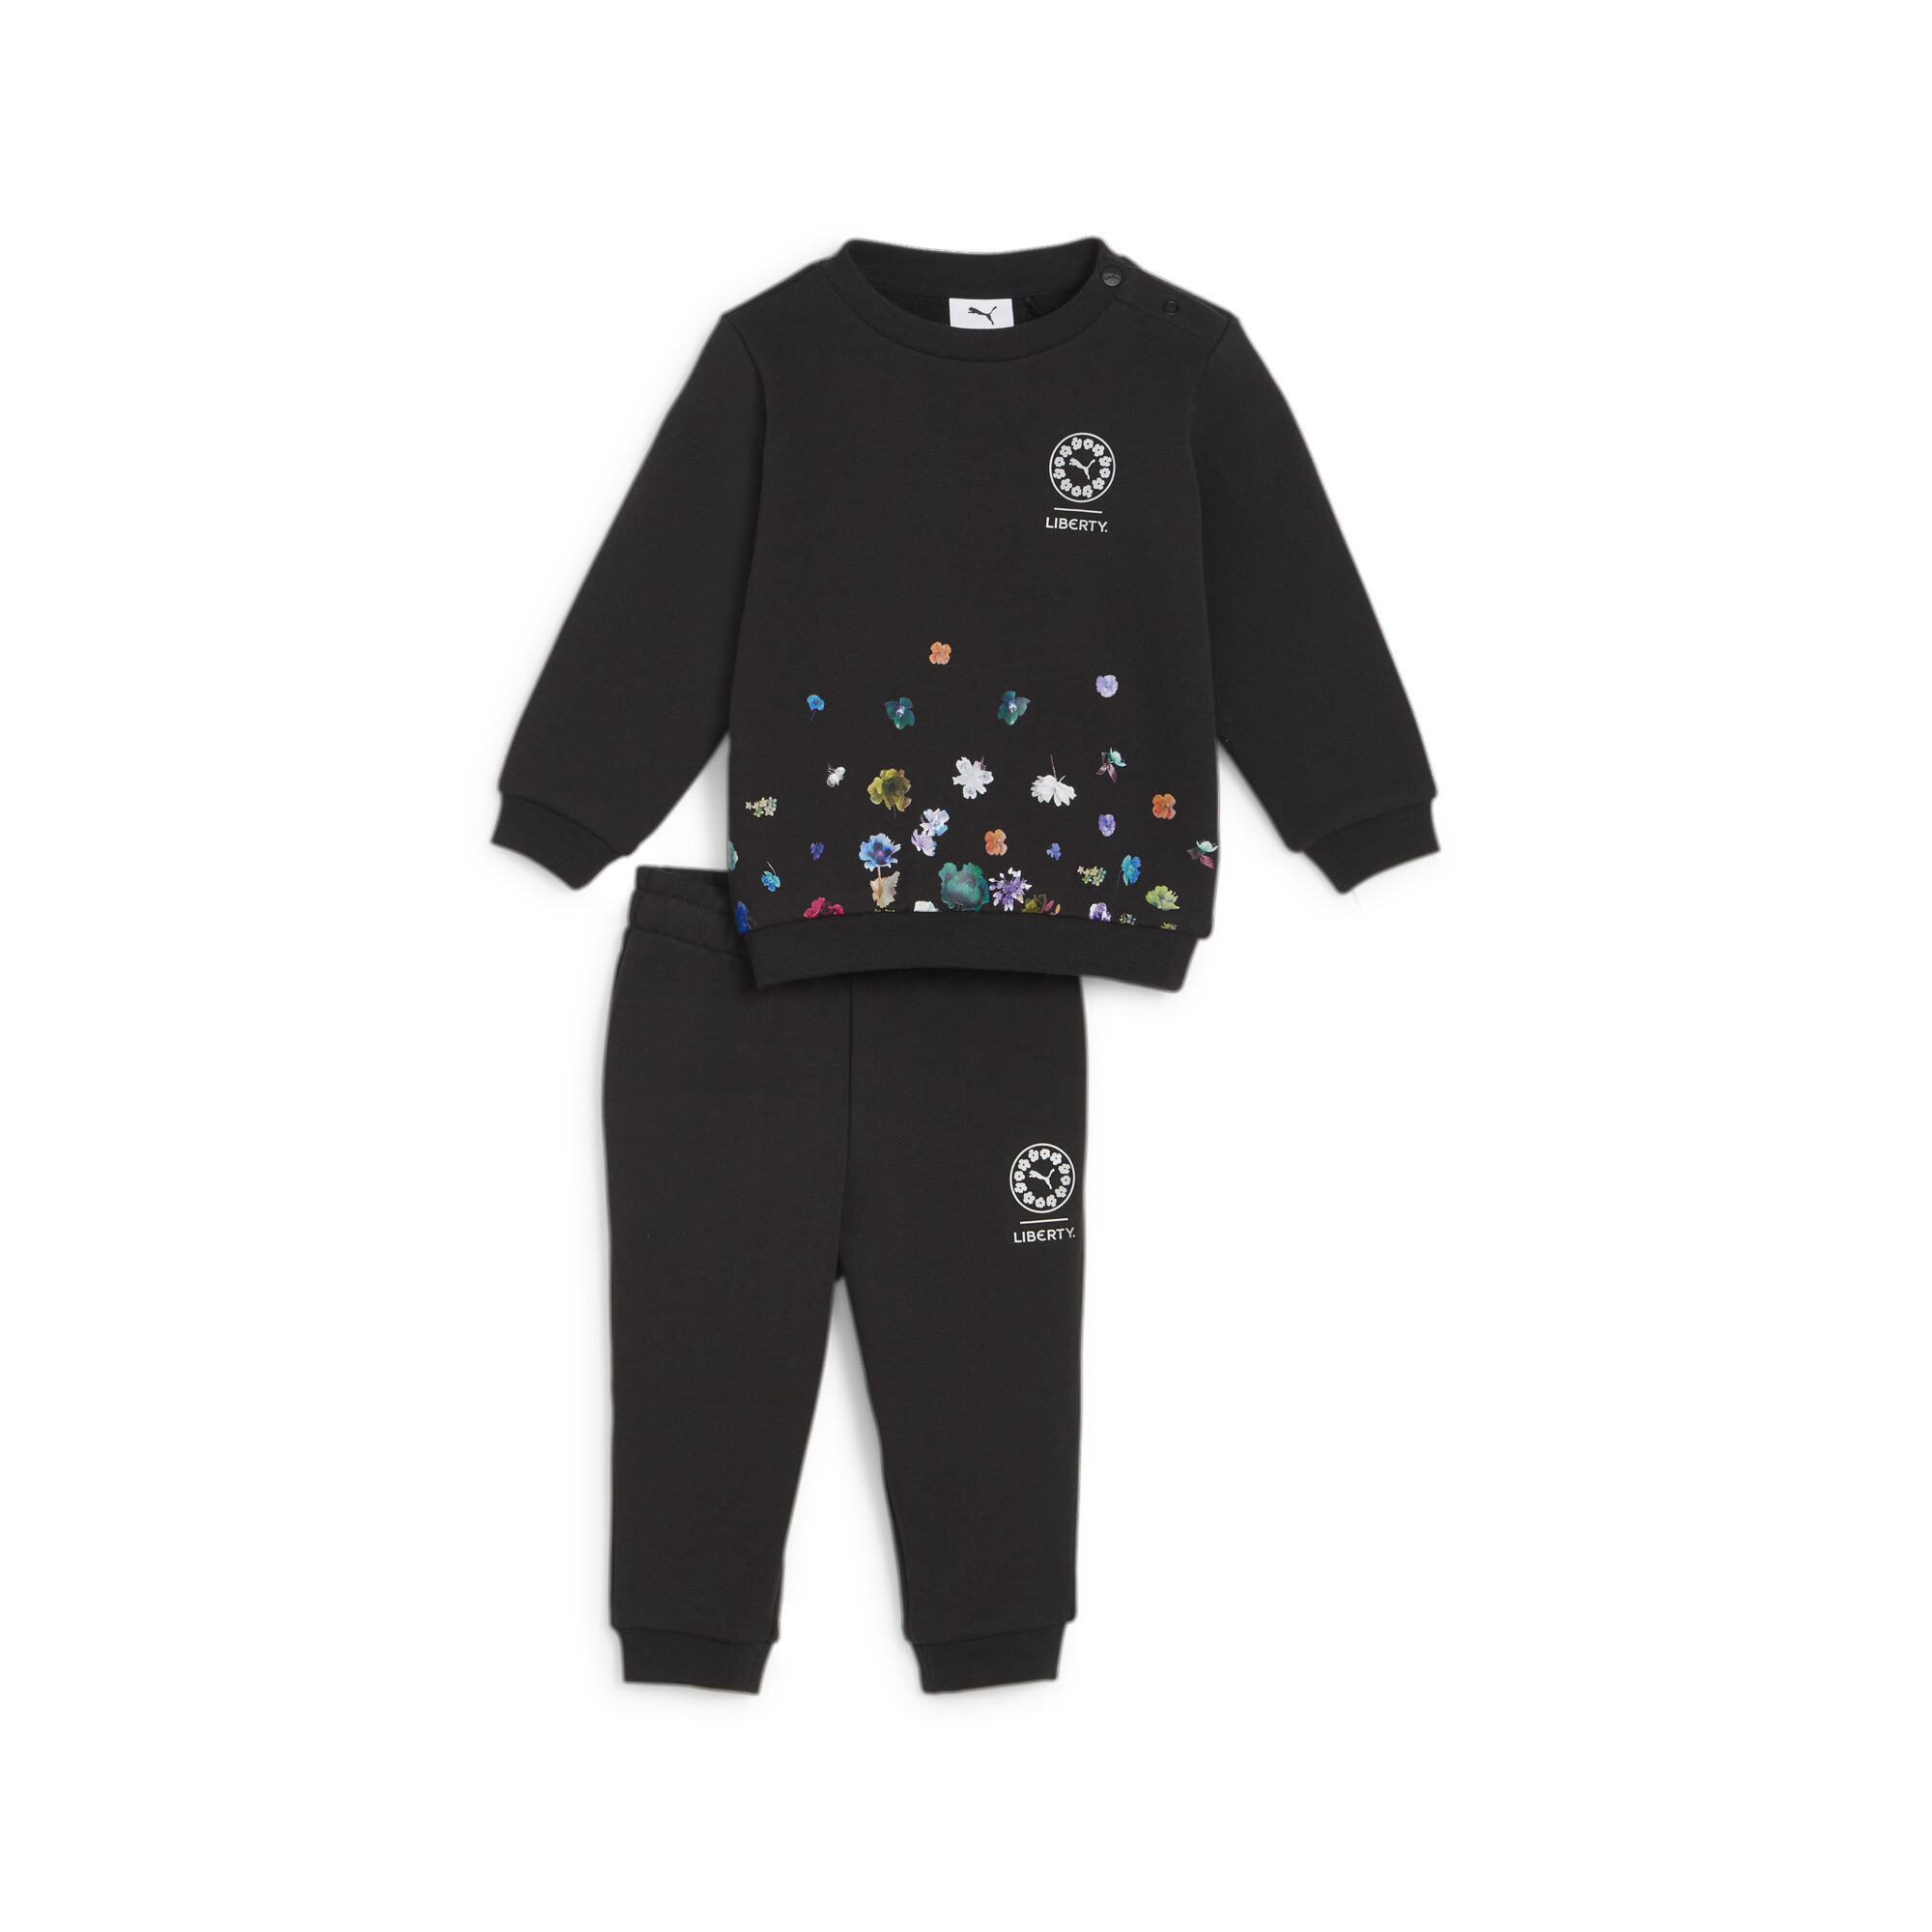 Kids' PUMA X LIBERTY Toddlers' Jogger Set In Black, Size 4-6 Months